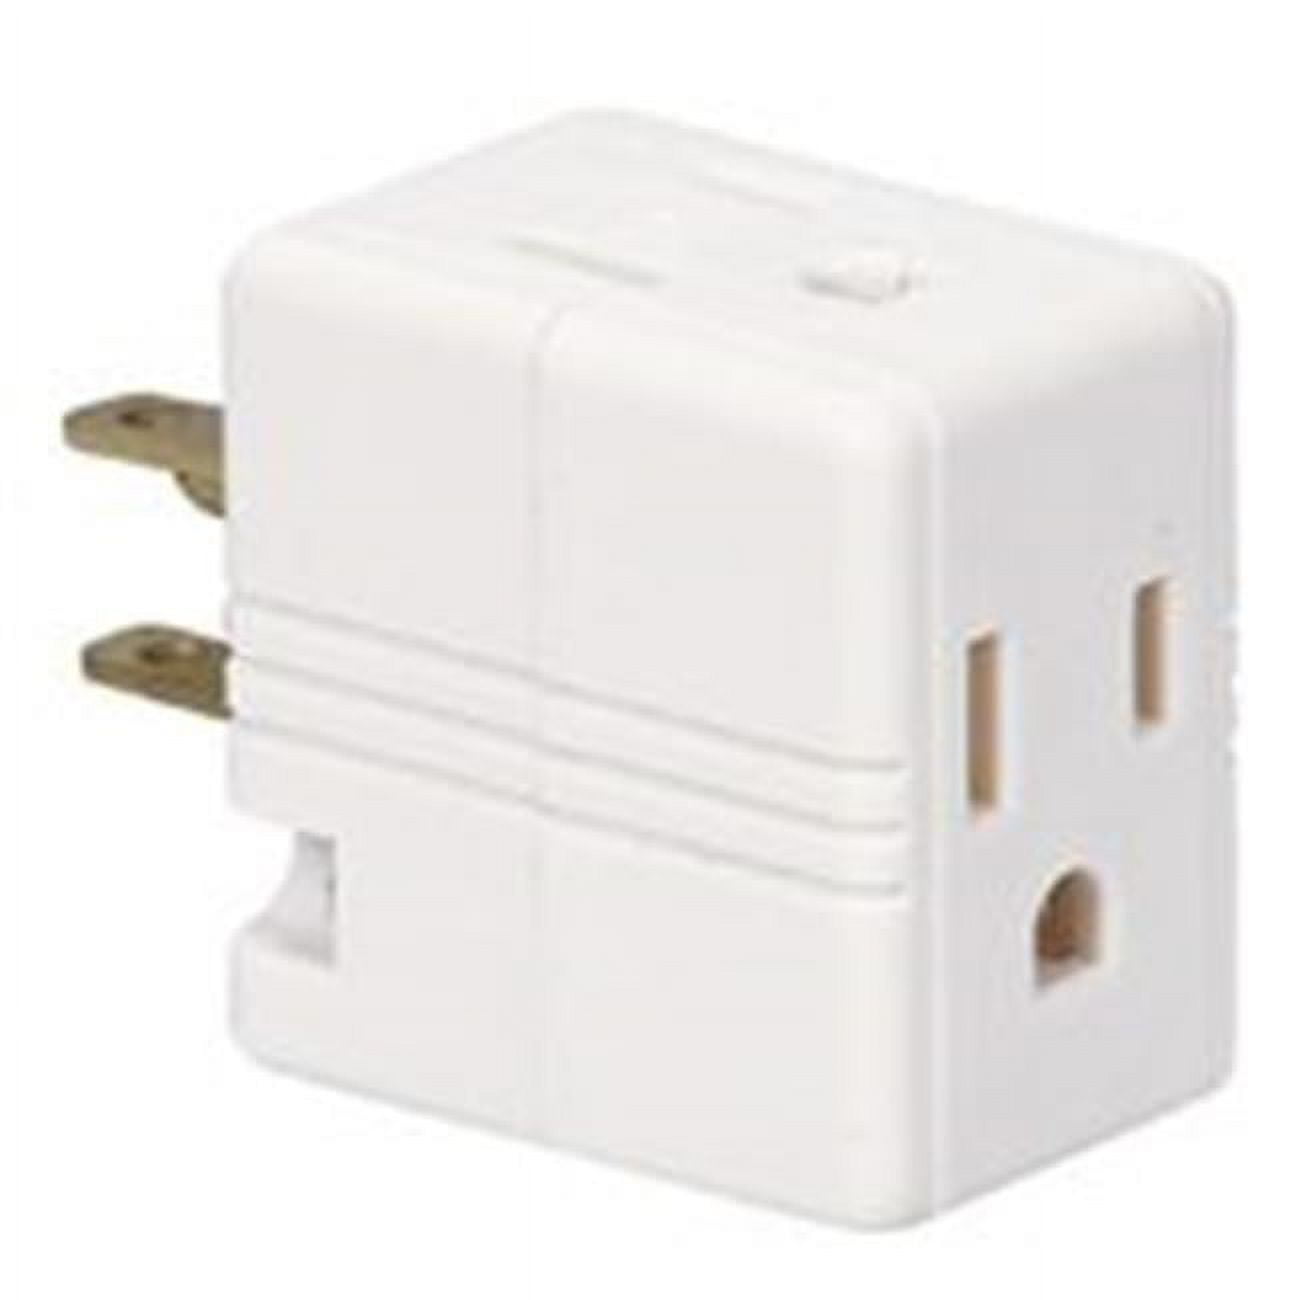 Universal Travel Adapter Plug Adaptor 3-Way US Type A 2-Pin AC Power Socket  Electrical Converters Flat Plug Adapter For Home Appliances, Refrigerator,  Washing Machine, Aircon, Electric Fan, TV, Cellphone, Tablet, PC, Printer